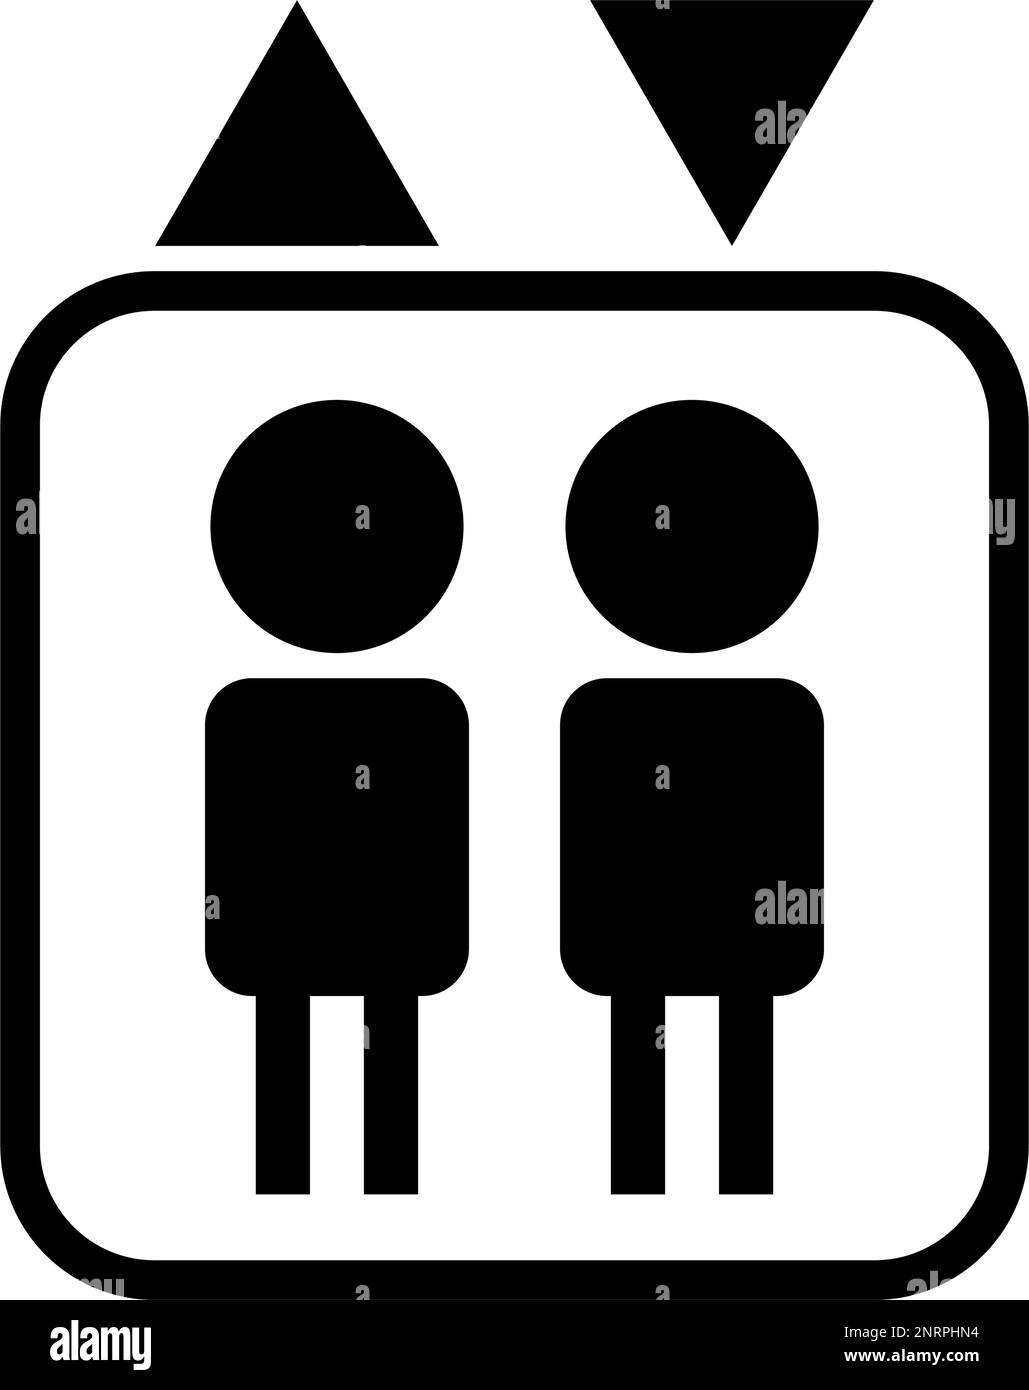 Elevator icon and two passenger icons. Editable vector. Stock Vector